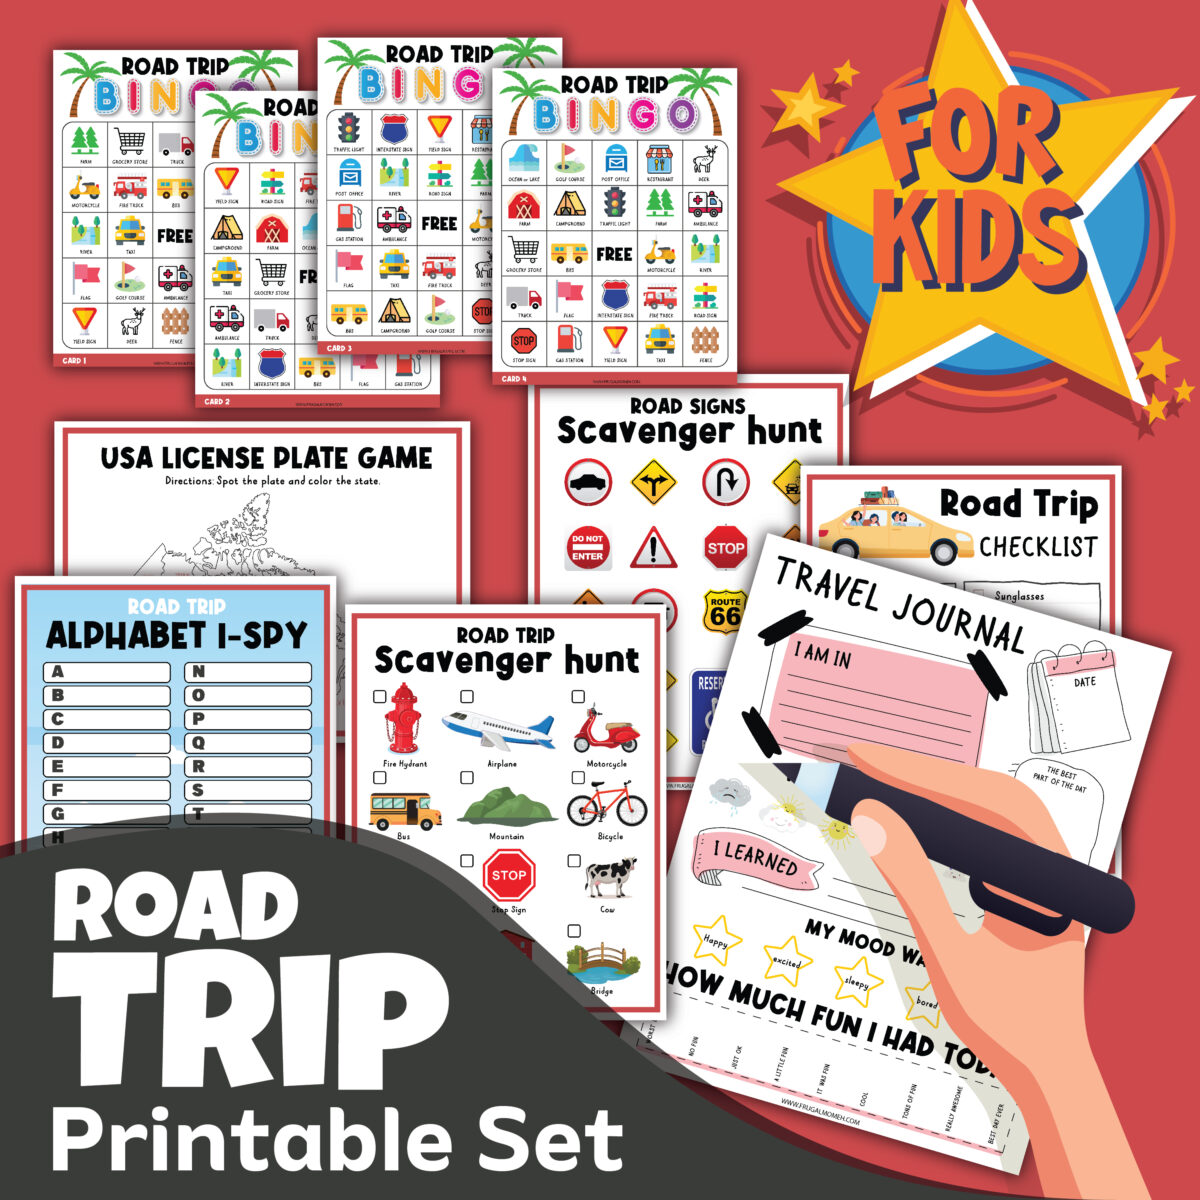 Grab these free printable road trip activities for kids to keep your family busy for hours, plus 14 more kid approved travel activities!